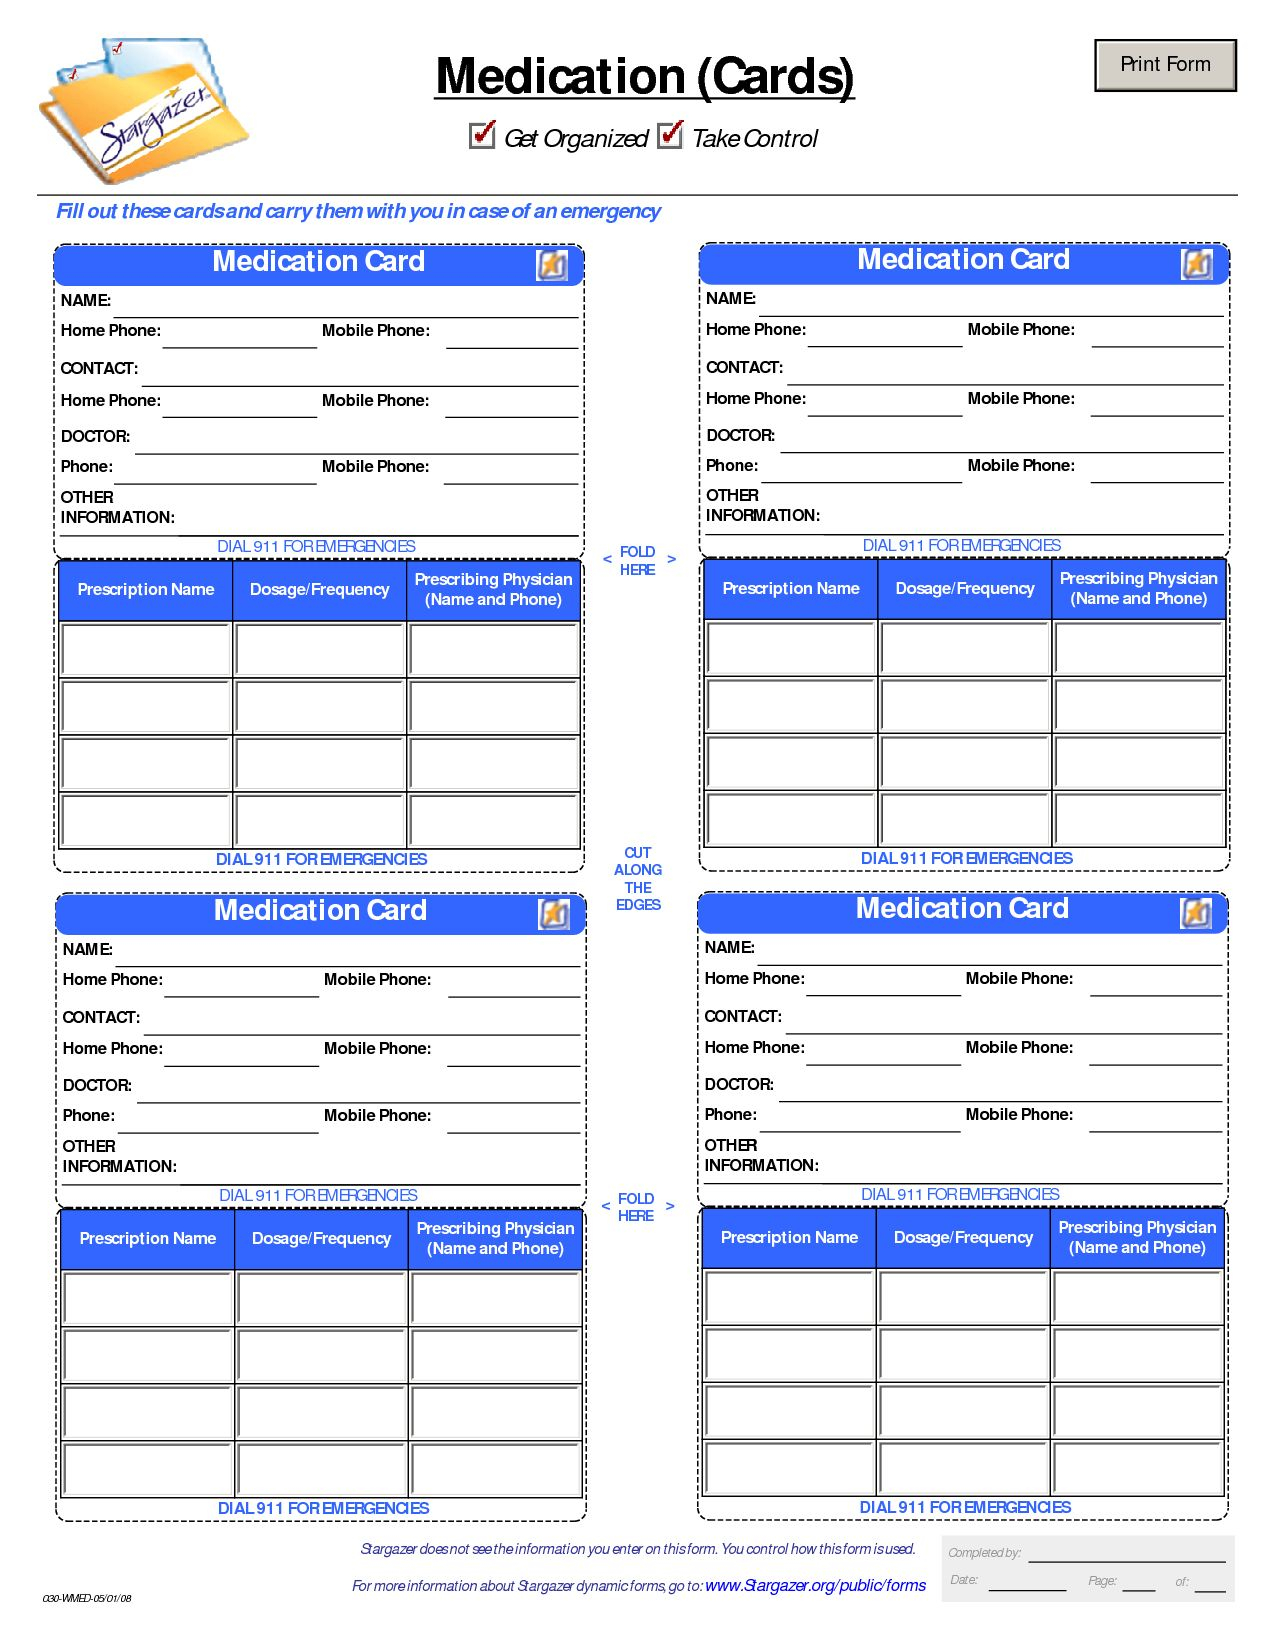 Patient Medication Card Template In 2020 Medication List Medical 